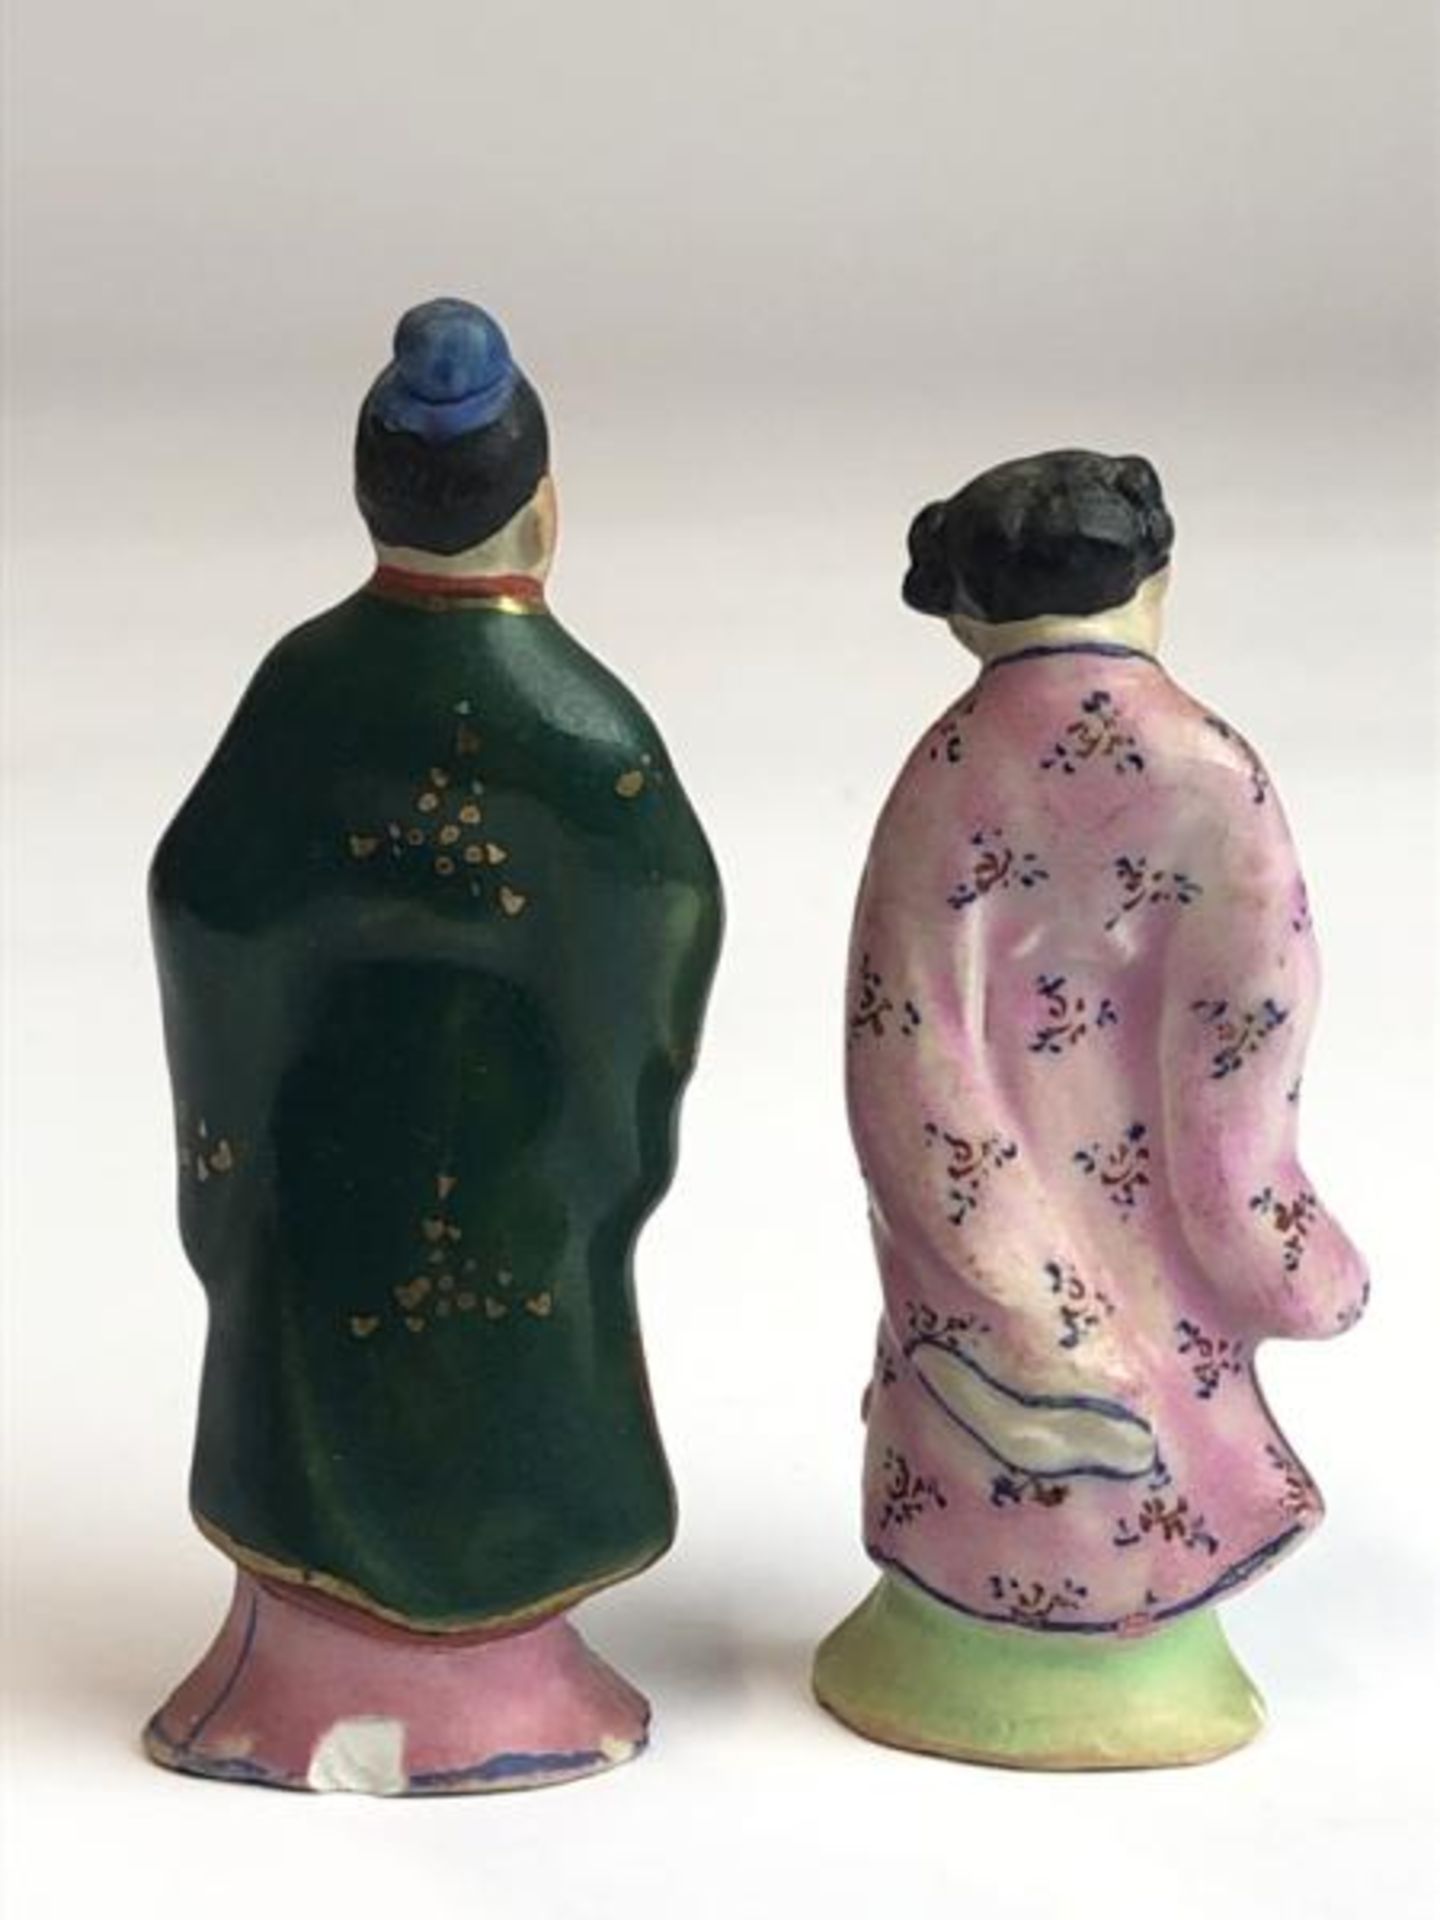 Eight Chinese miniature hand painted figurines representing the eight immortals, tallest 7cm - Image 12 of 13